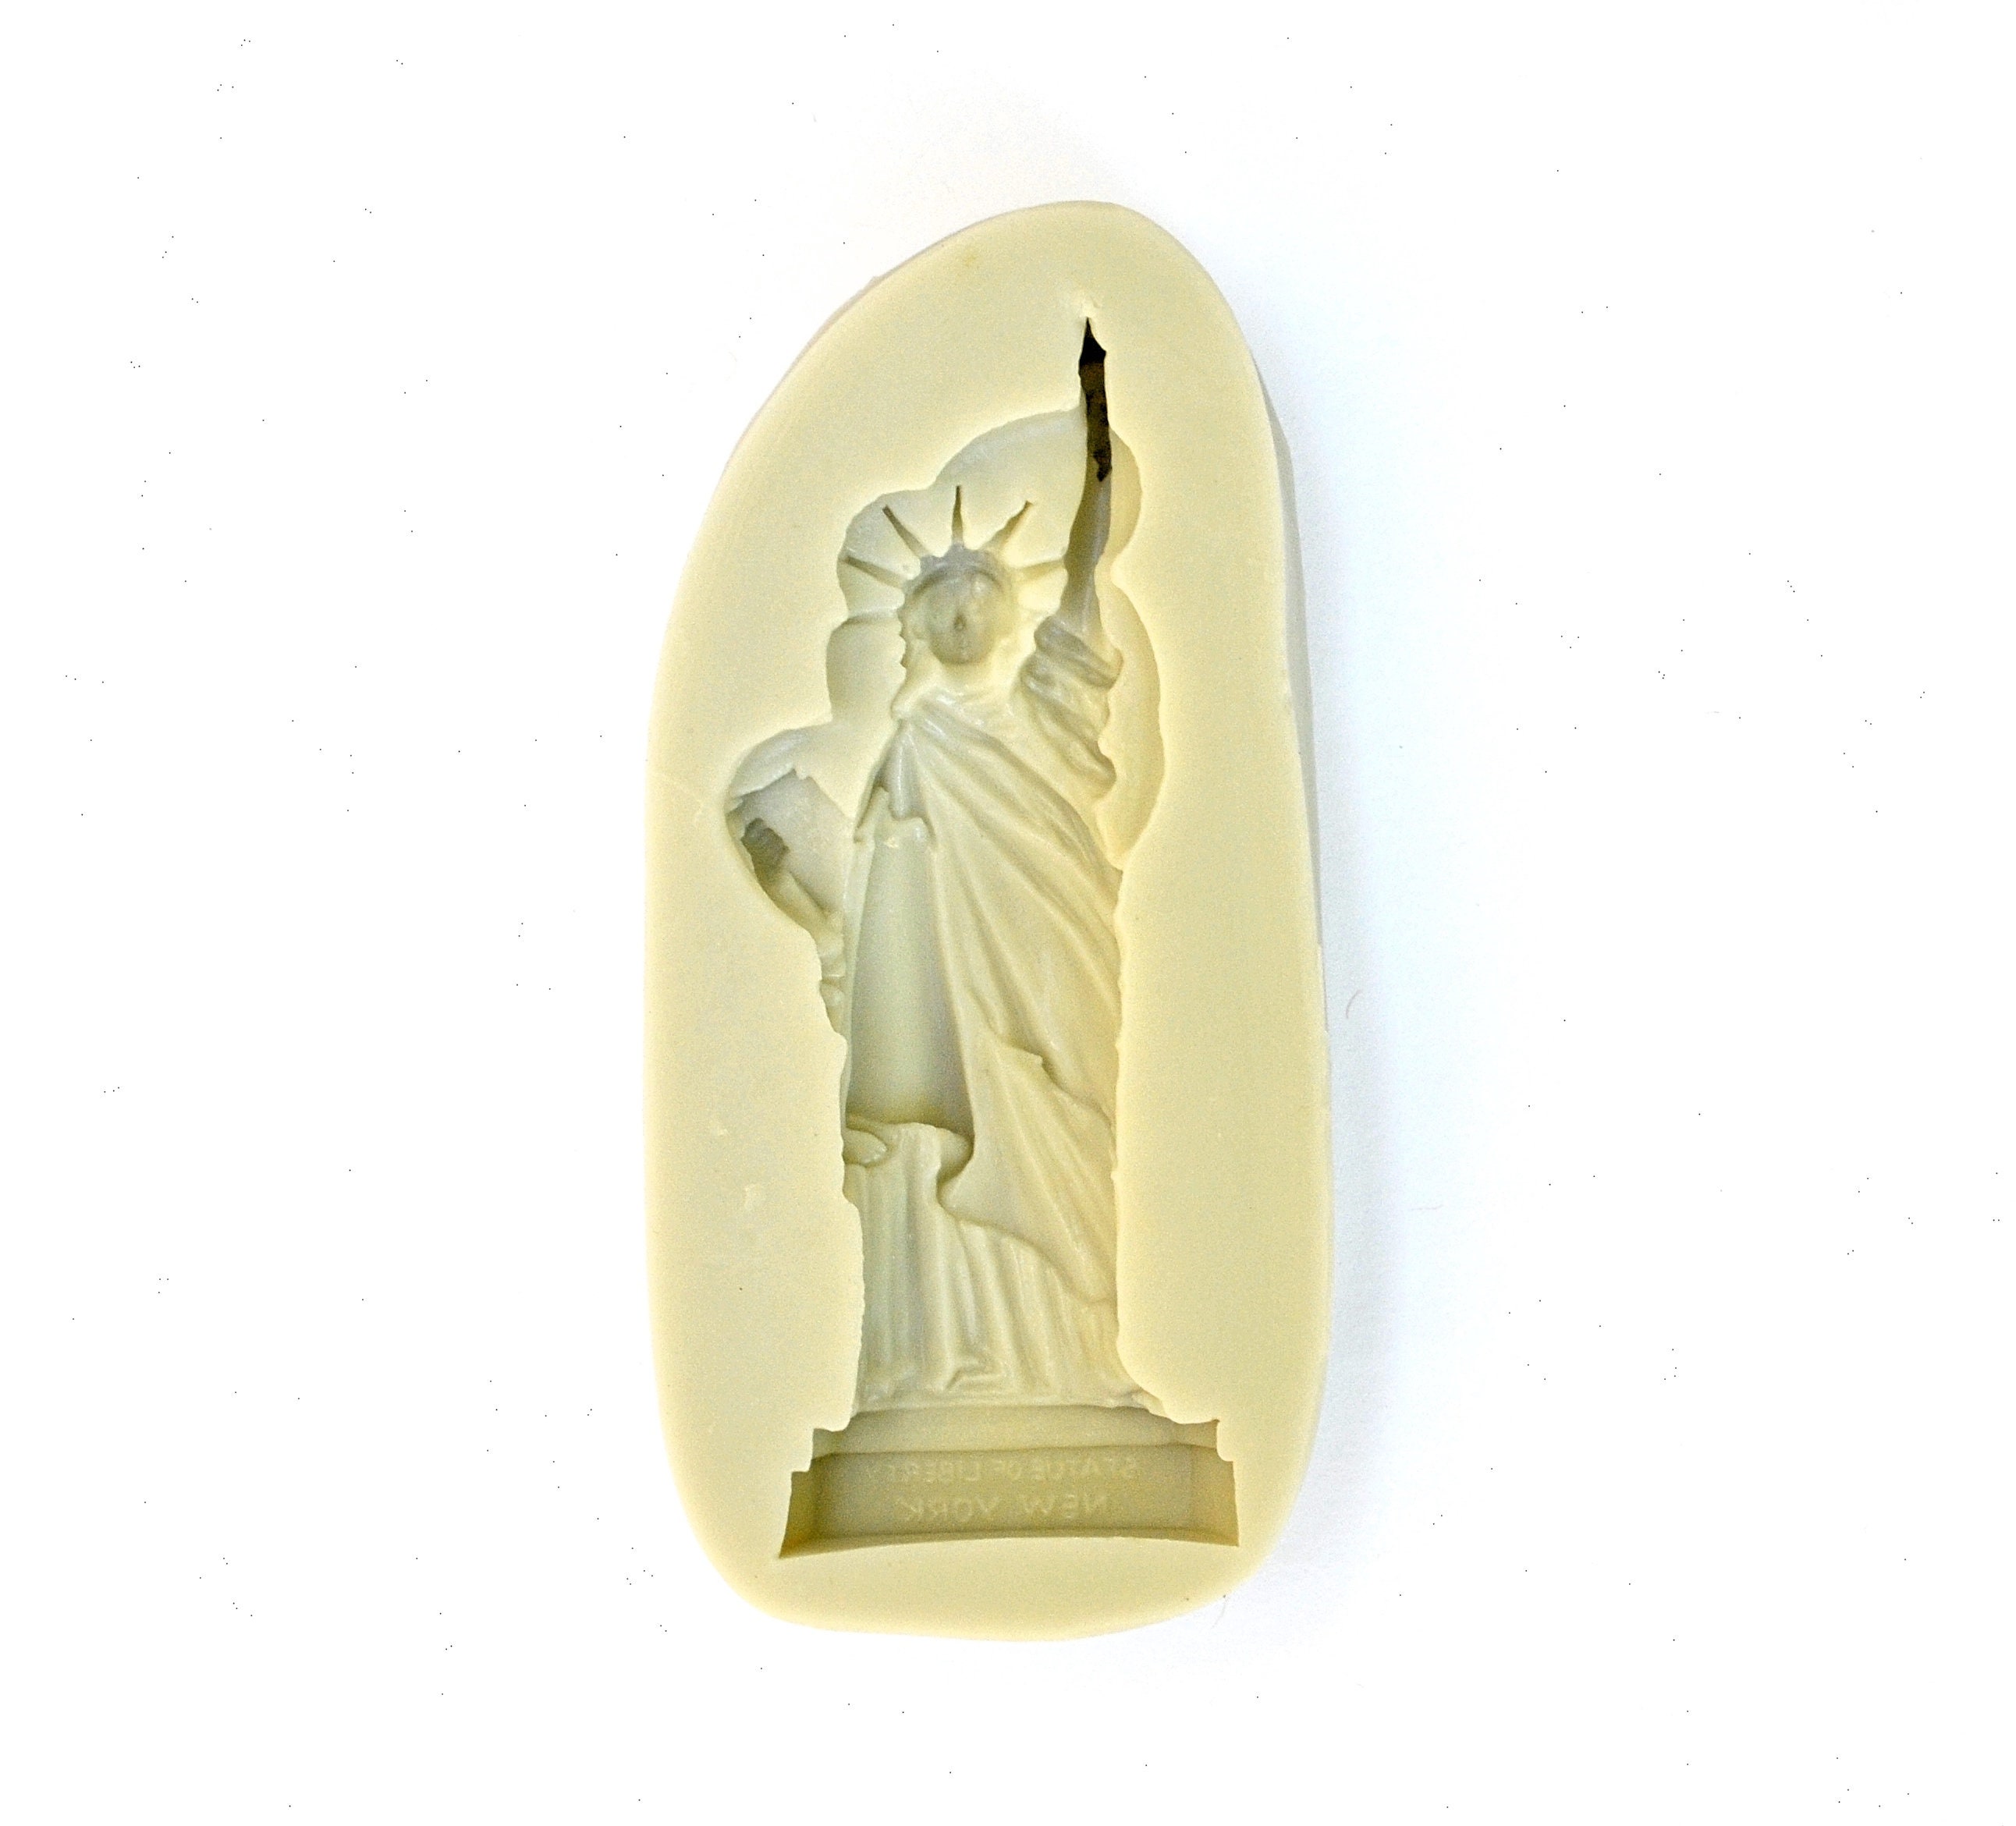 Liberty　Statue　Mold　Fondant　of　Mold　Chocolate　Mold　Silicone　Etsy